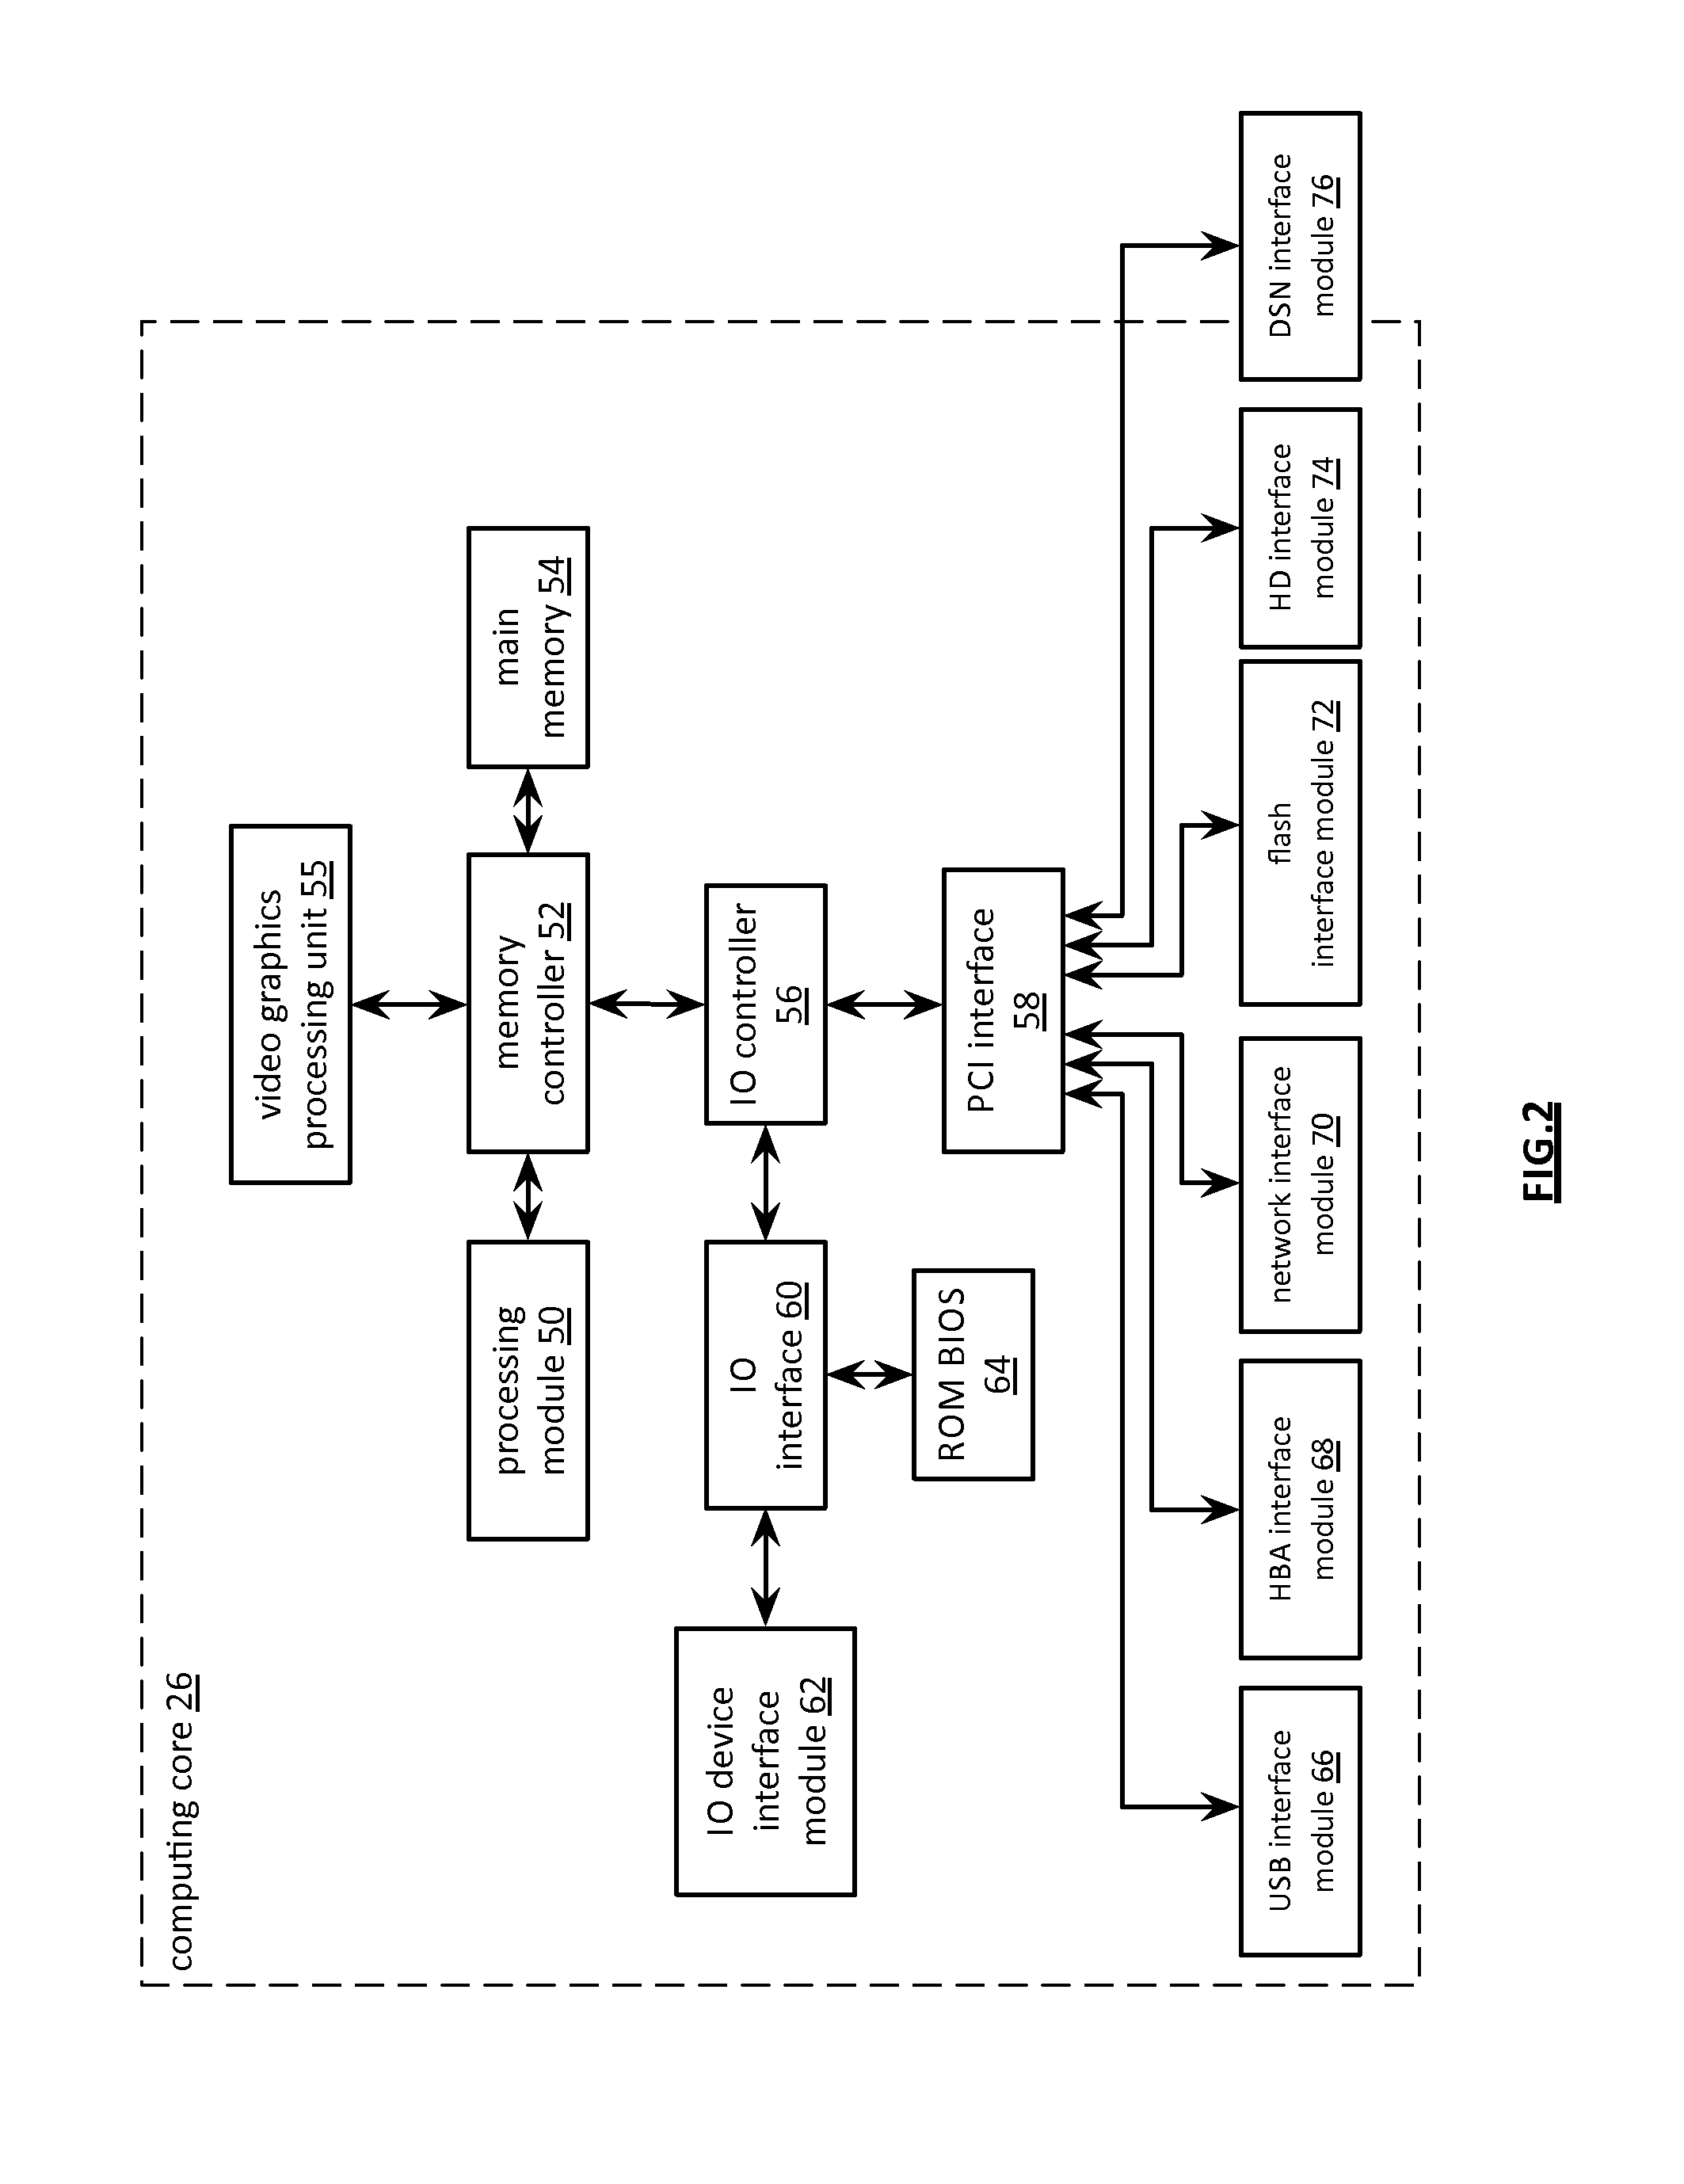 Retrieving data segments from a dispersed storage network